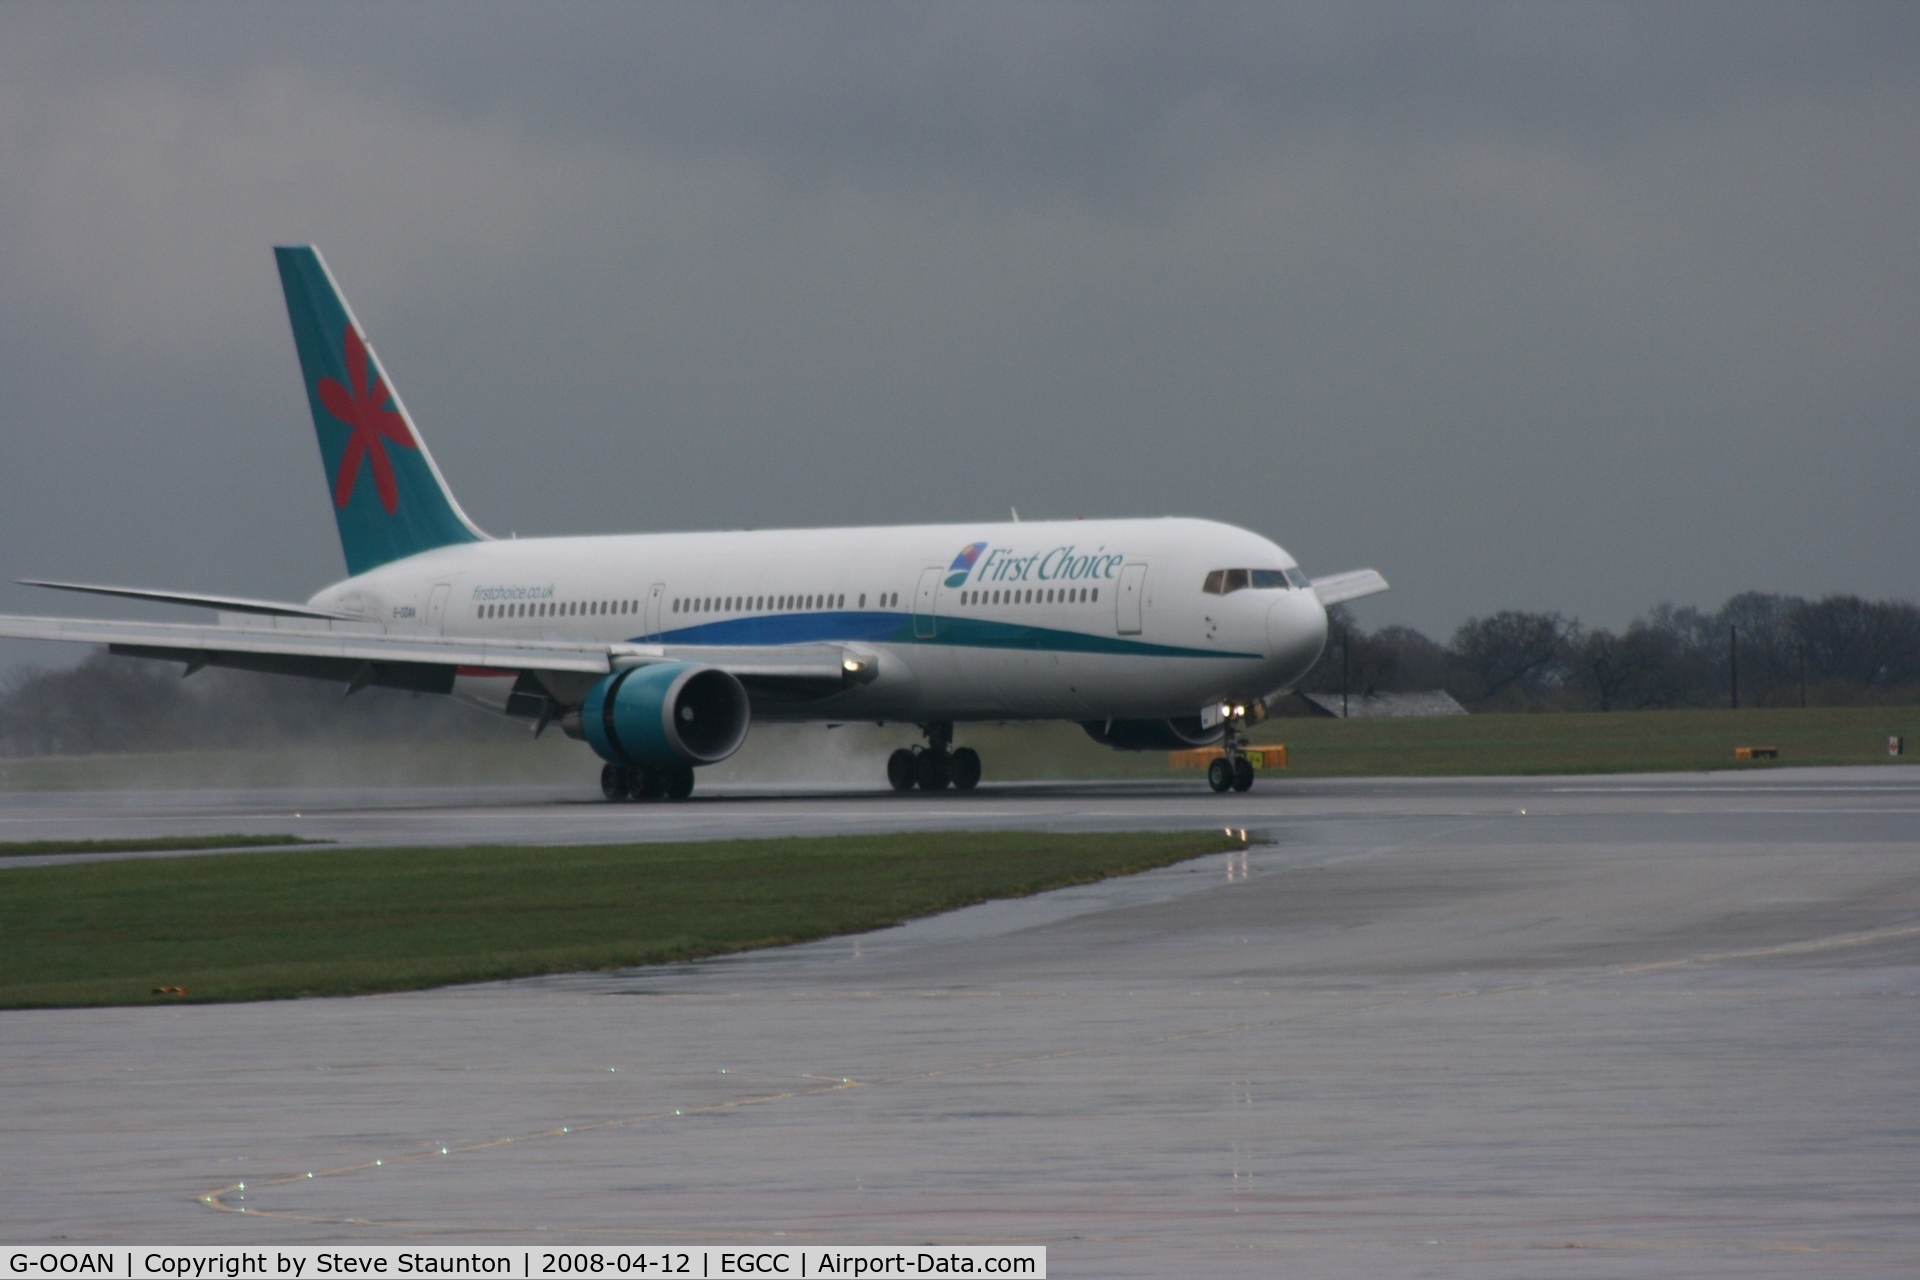 G-OOAN, 1993 Boeing 767-39H C/N 26256, Taken at Manchester Airport on a typical showery April day